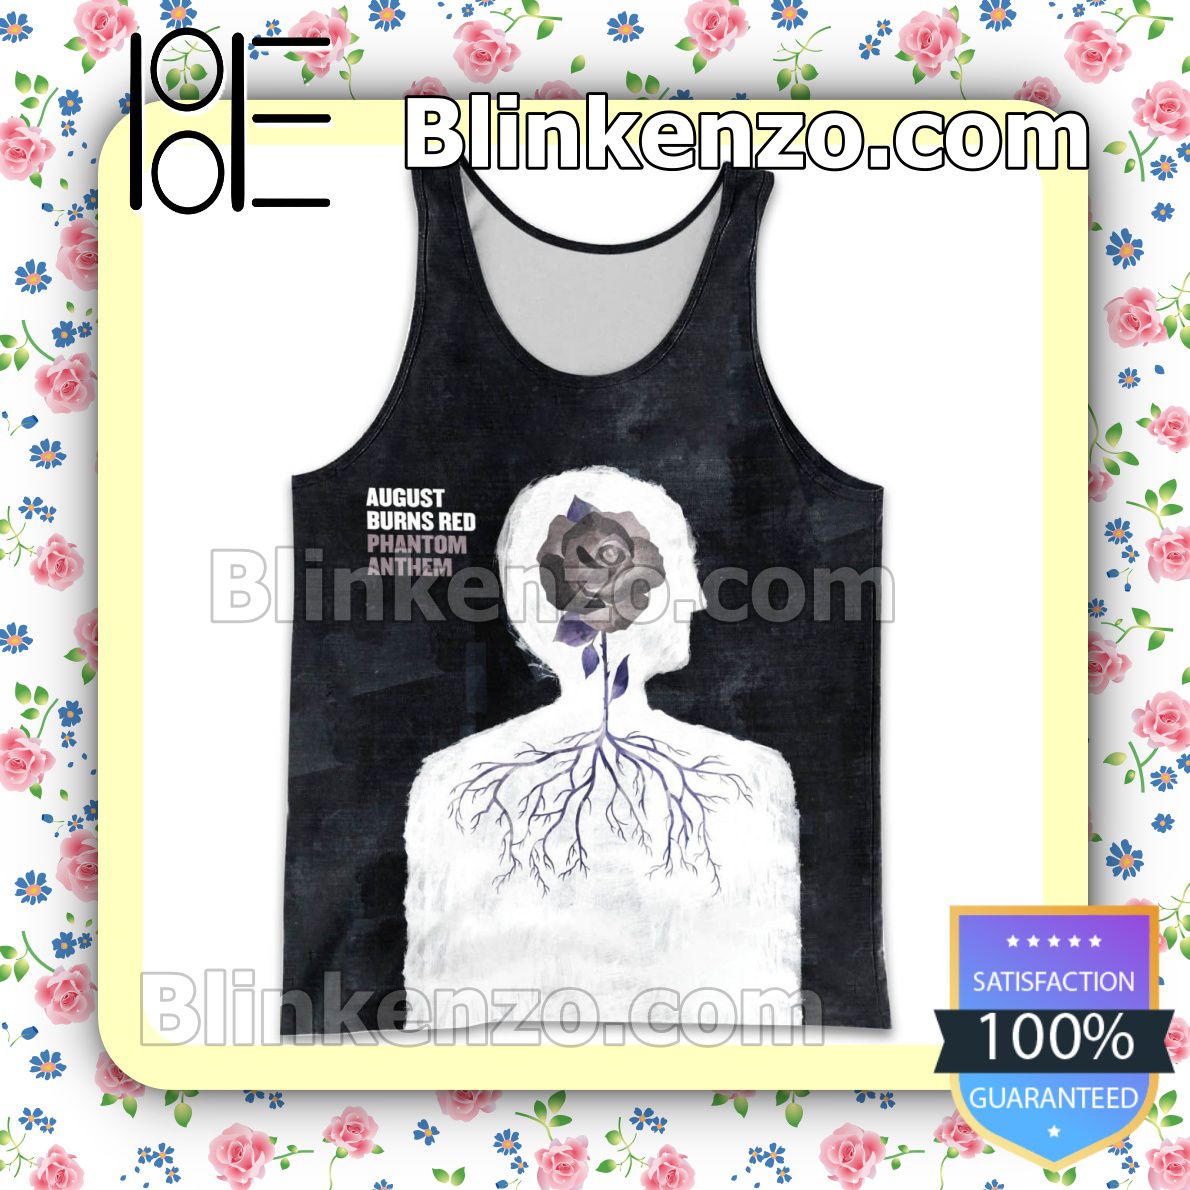 Personalized August Burns Red Phantom Anthem Album Cover Womens Tank Top